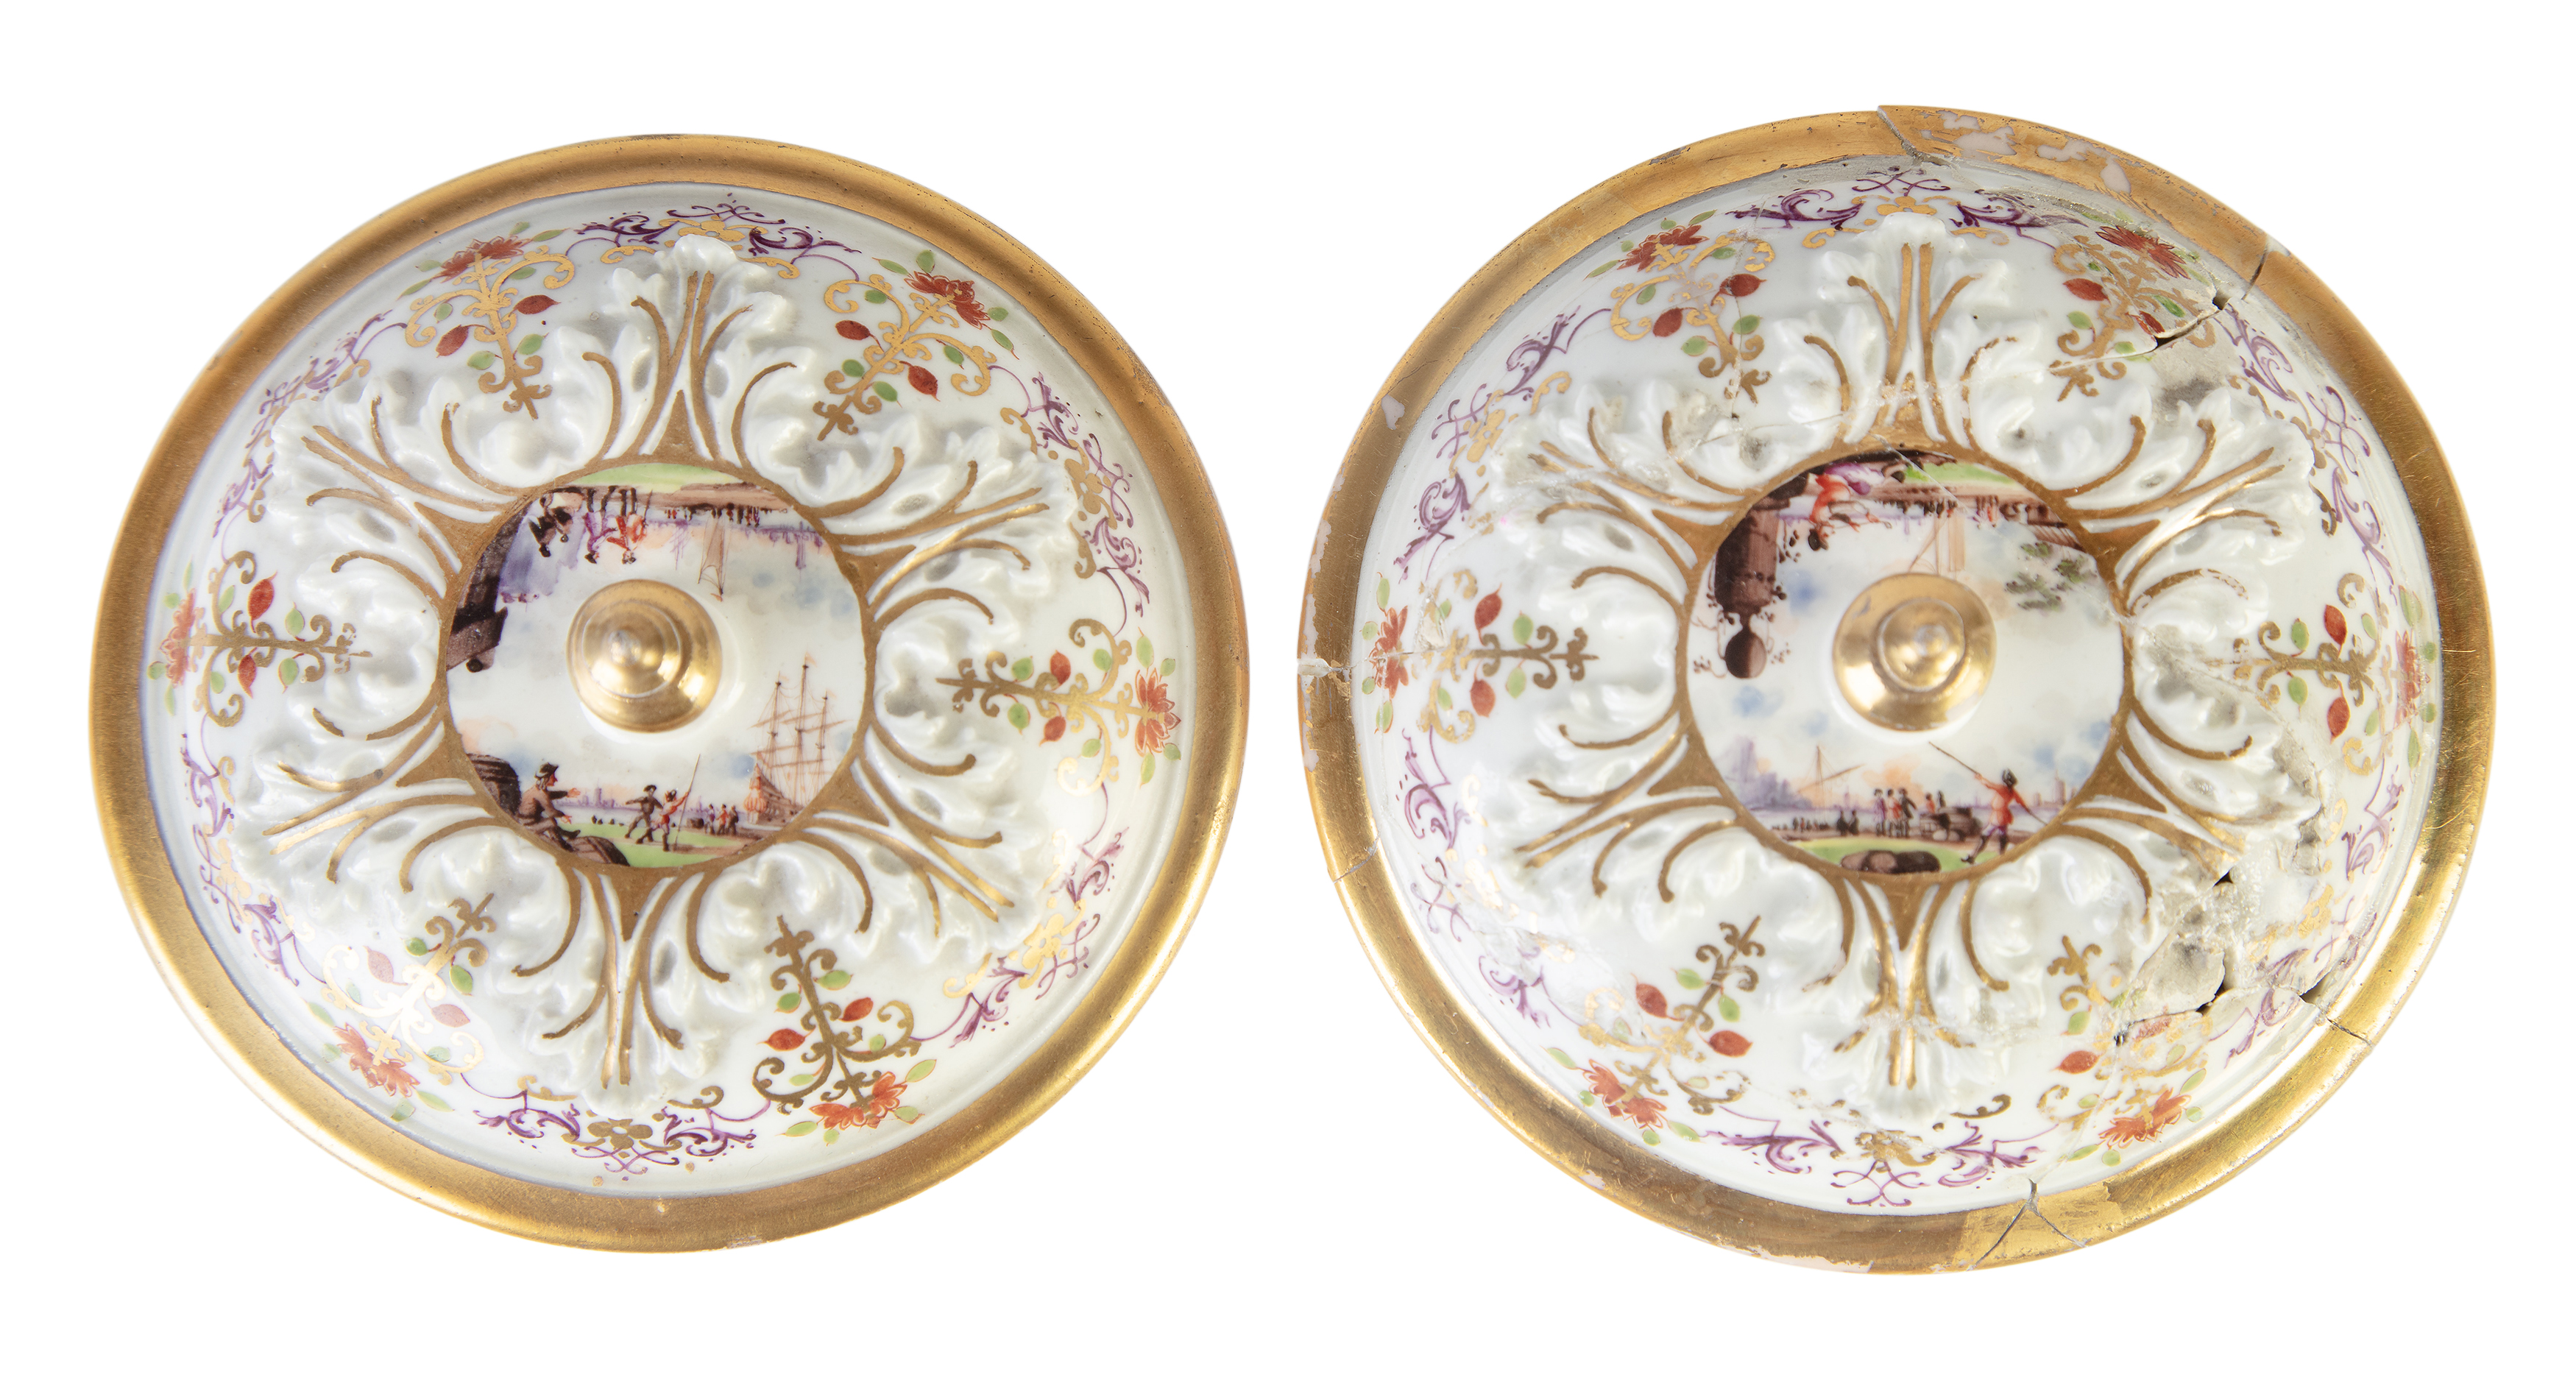 A pair of Meissen porcelain beakers and covers, 19th century, blue crossed swords marks, gilt 1. ... - Image 3 of 5